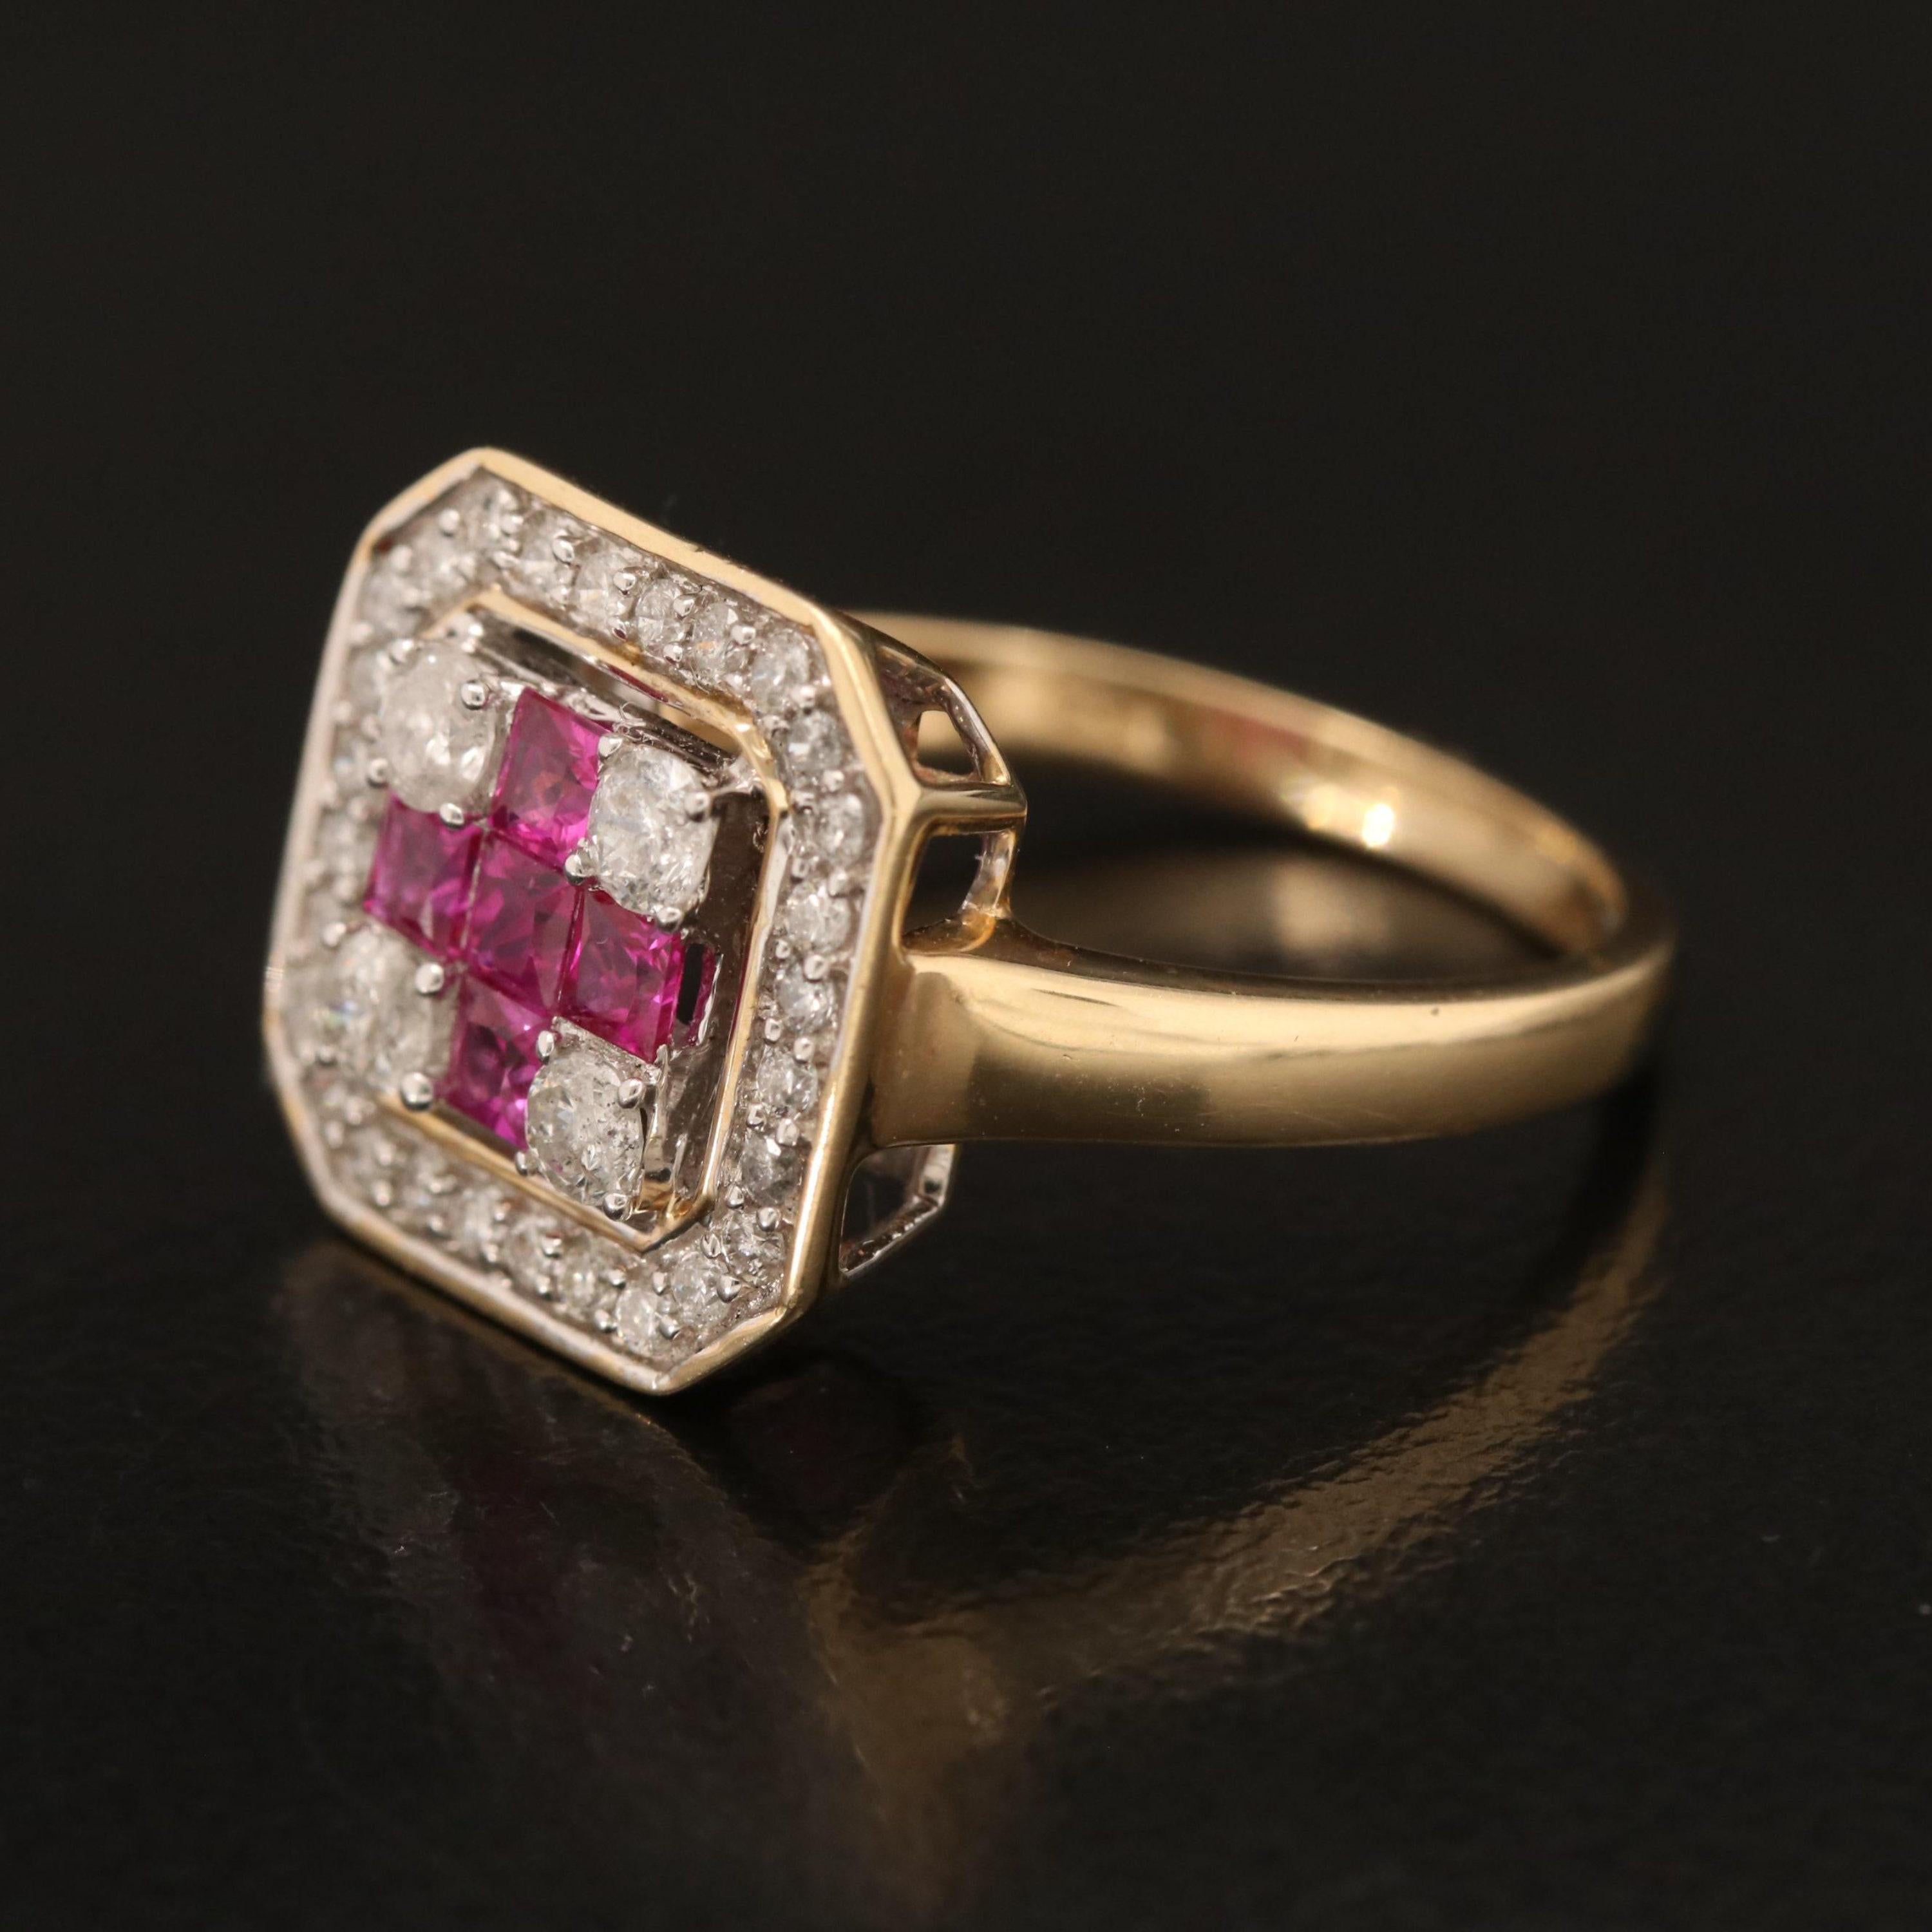 For Sale:  Vintage Art Deco Ruby Diamond Engagement Ring, Victorian Halo Ruby Cluster Ring 5